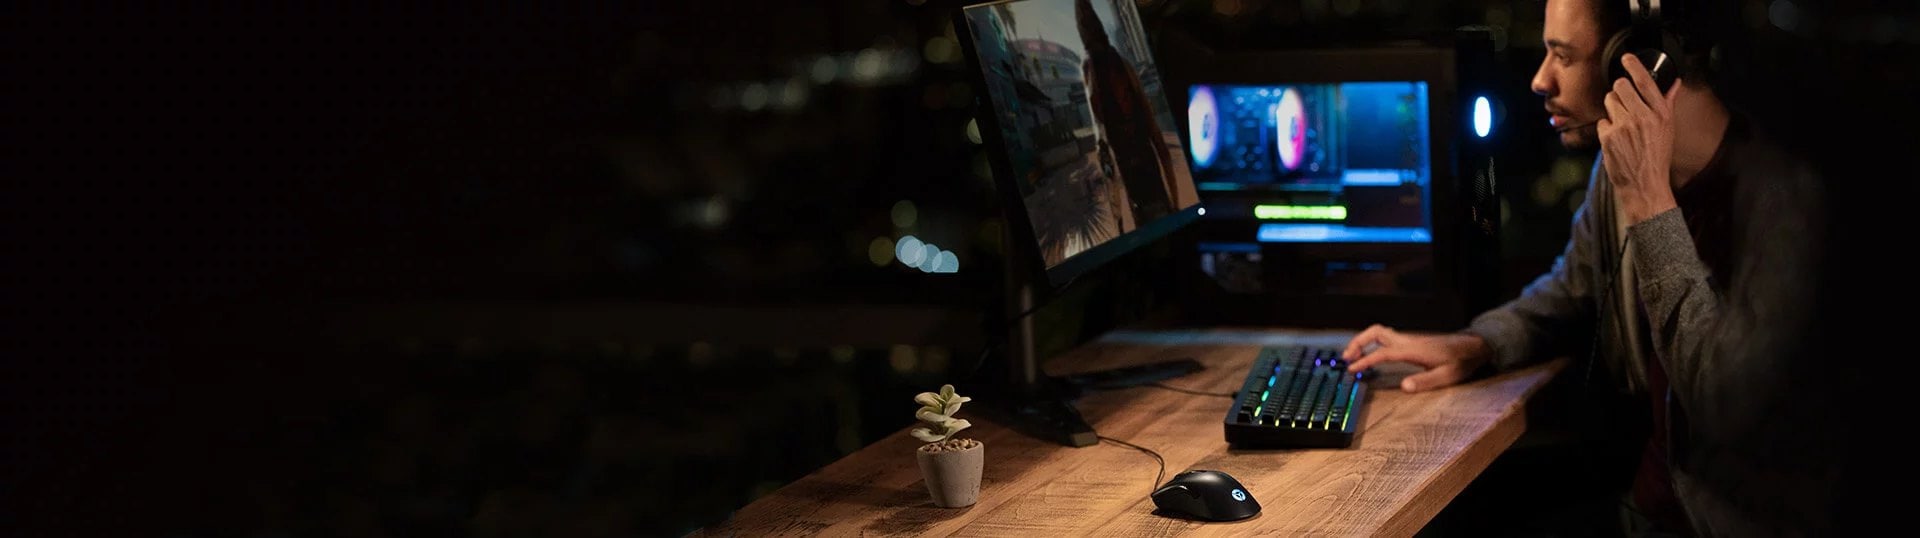 Legion Gaming Keyboard, Mouse and headset on a desk.